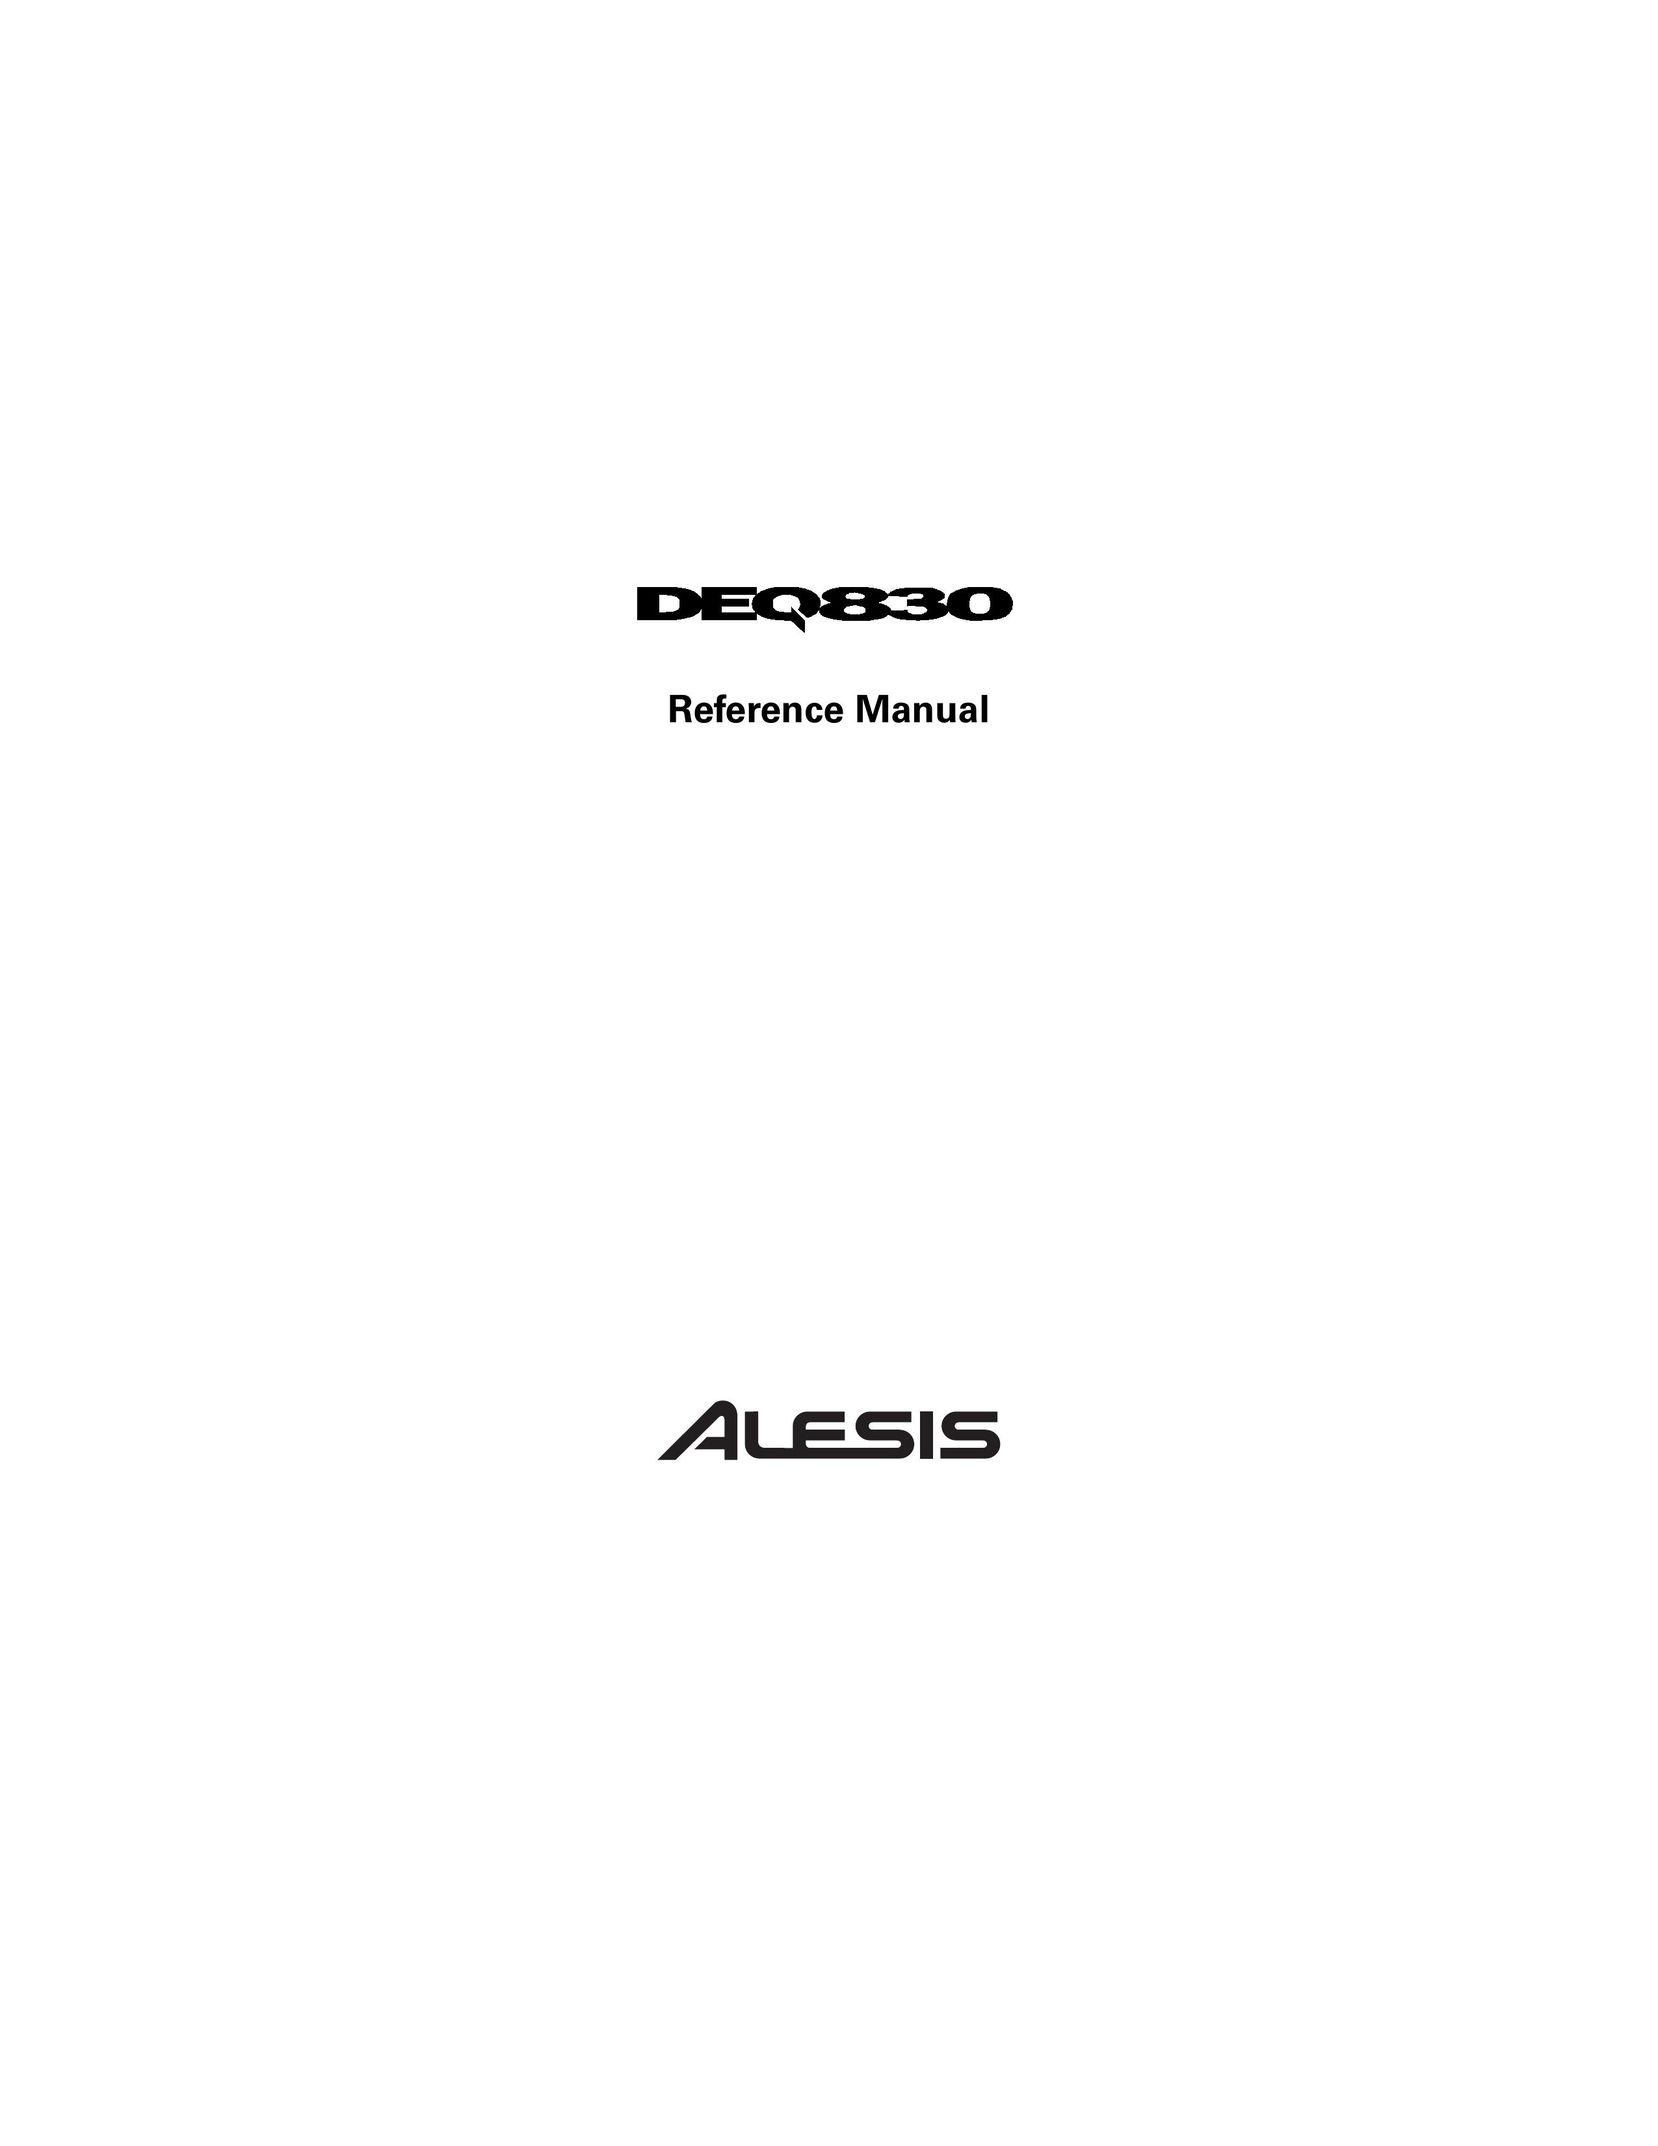 Alesis DEQ830 Stereo Equalizer User Manual (Page 1)